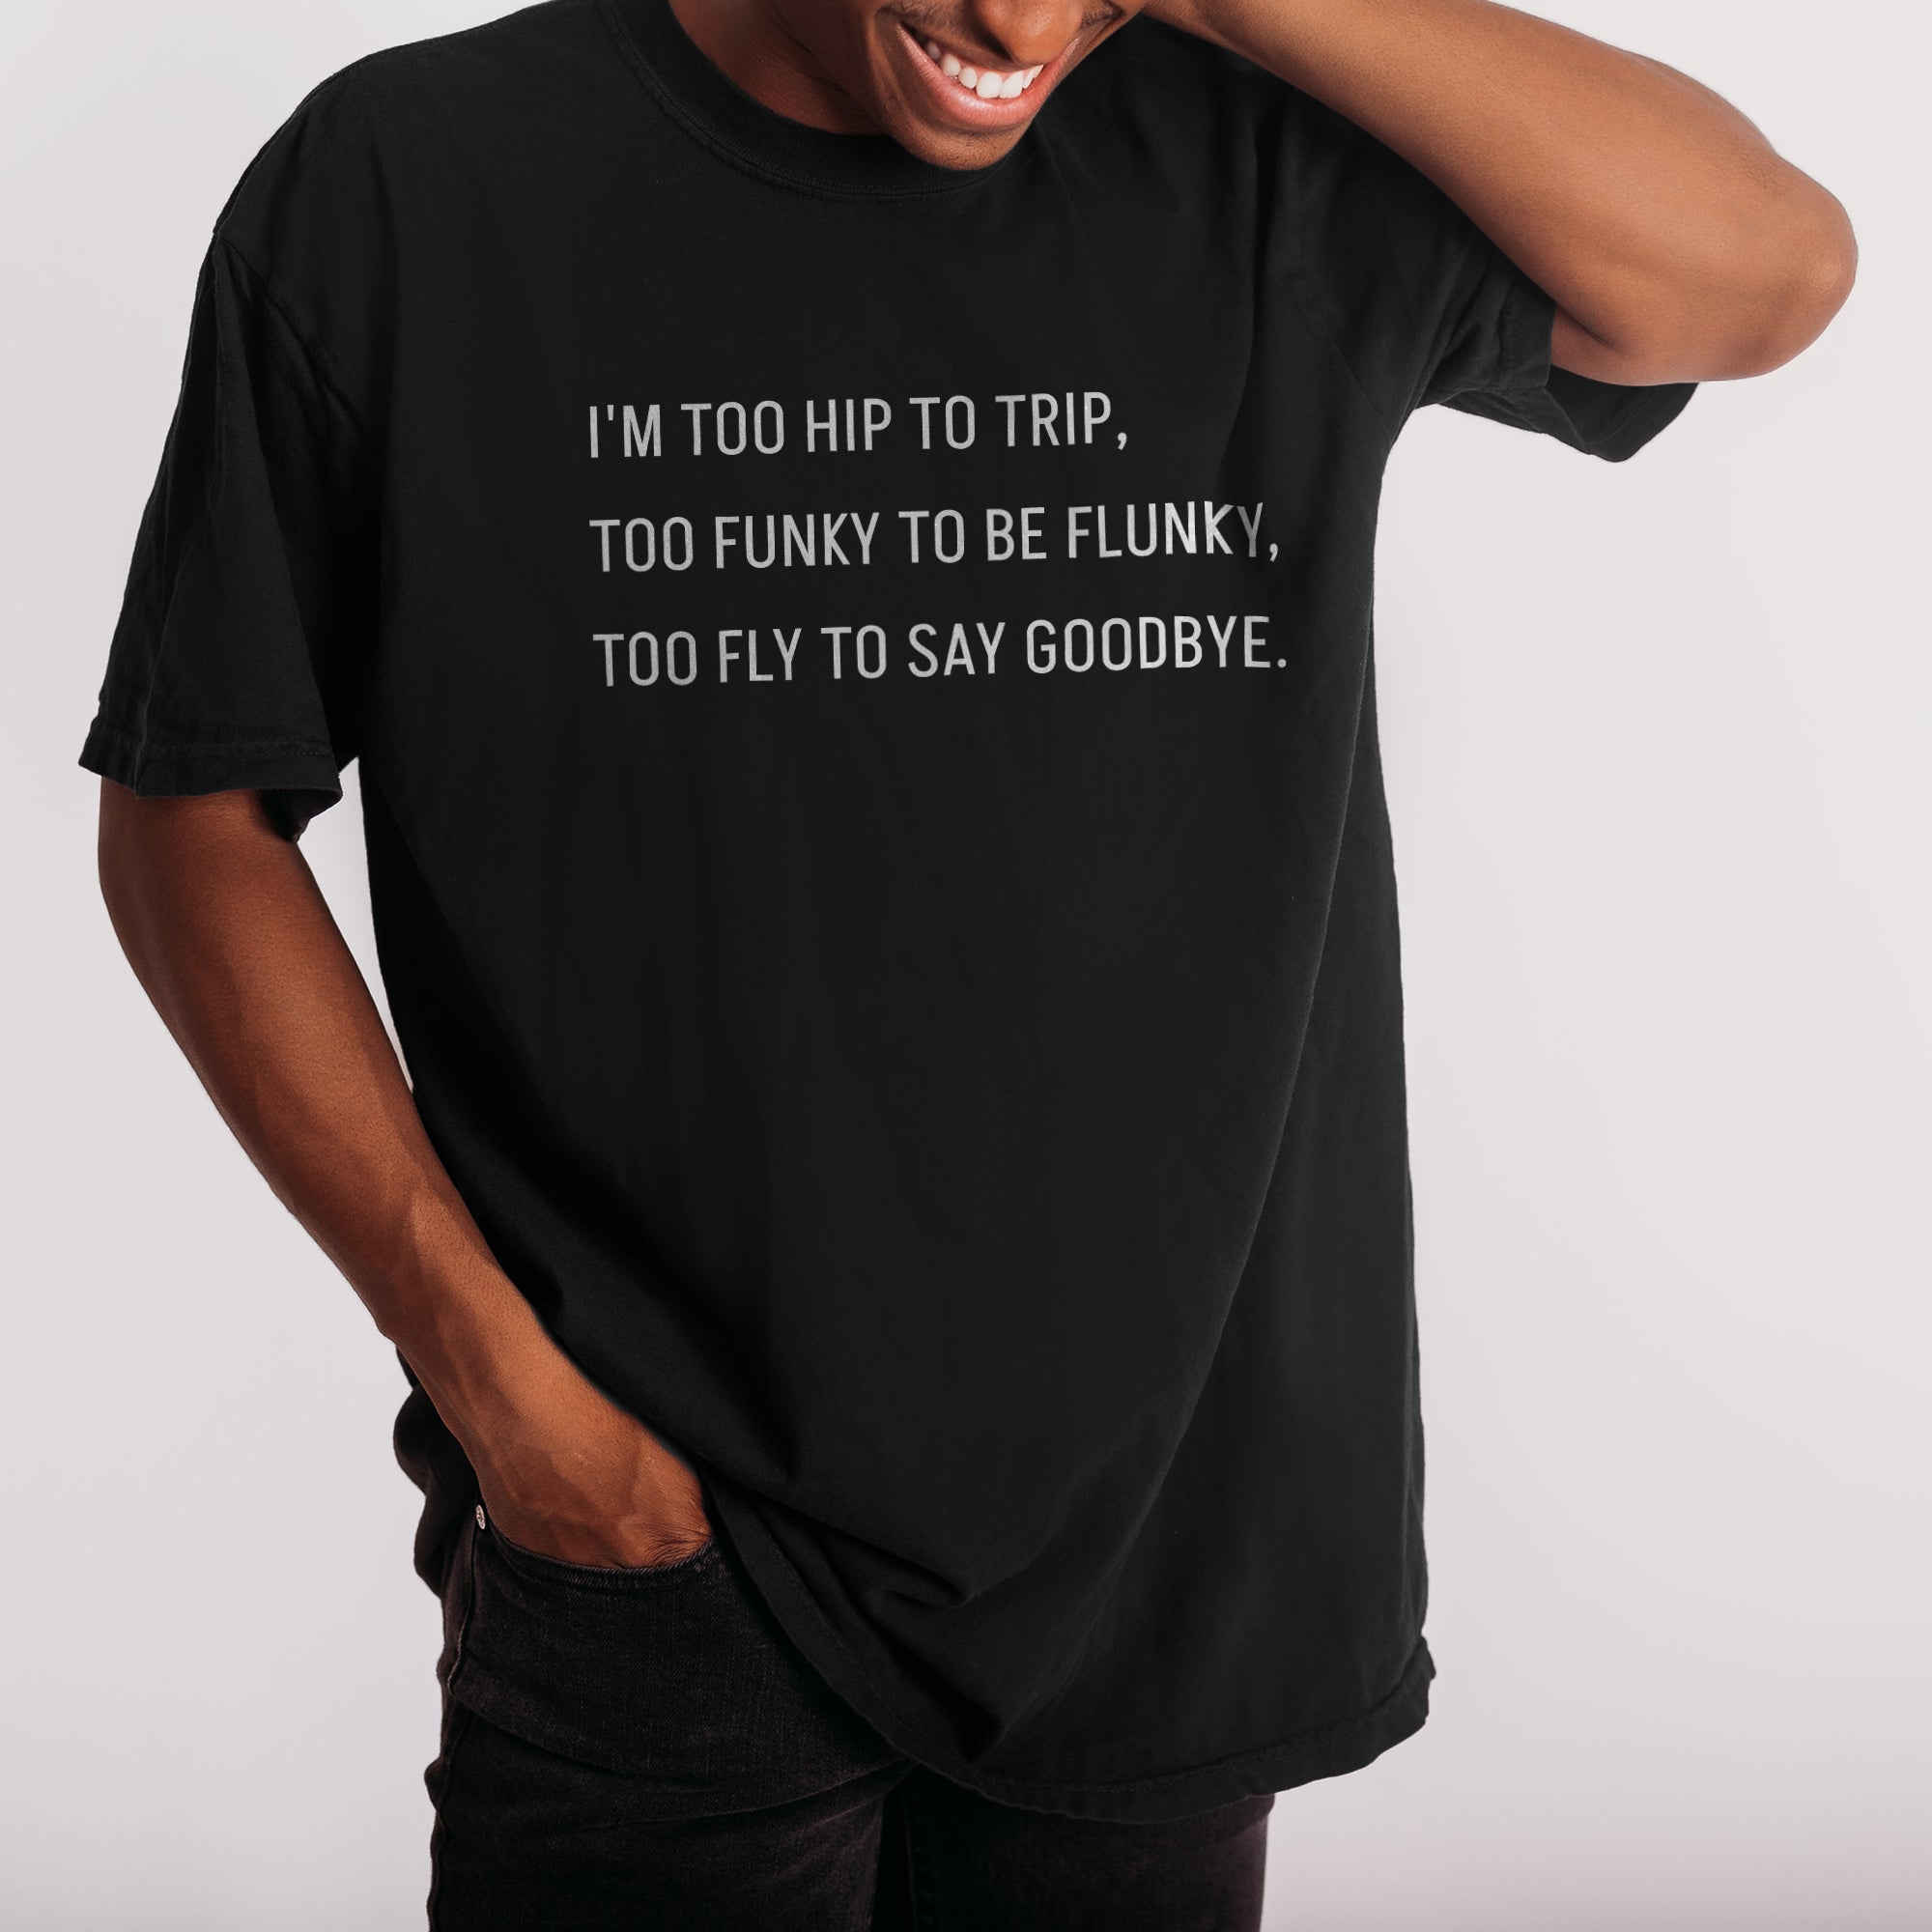 I'm Too Hip to Trip, Too Funky to Be Flunky, Too Fly to Say Goodbye Boyfriend Crew Tee Solid Black Image